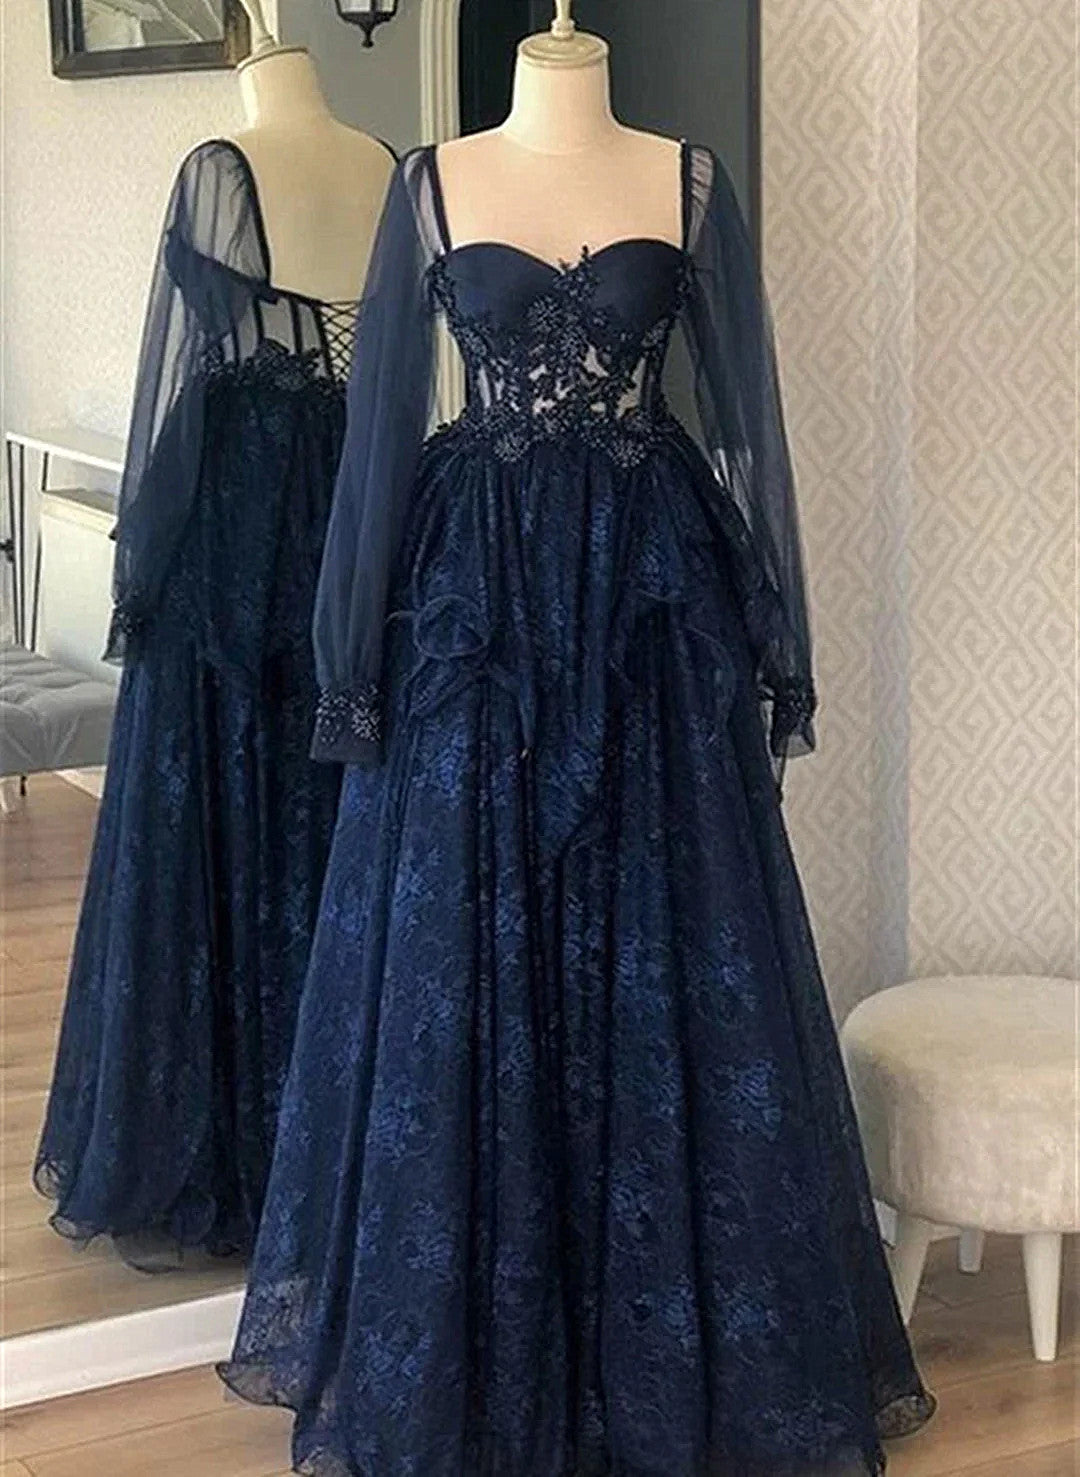 LOVECCRNavy Blue Tulle with Lace Long Sleeves Prom Dress, Navy Blue Party Dress